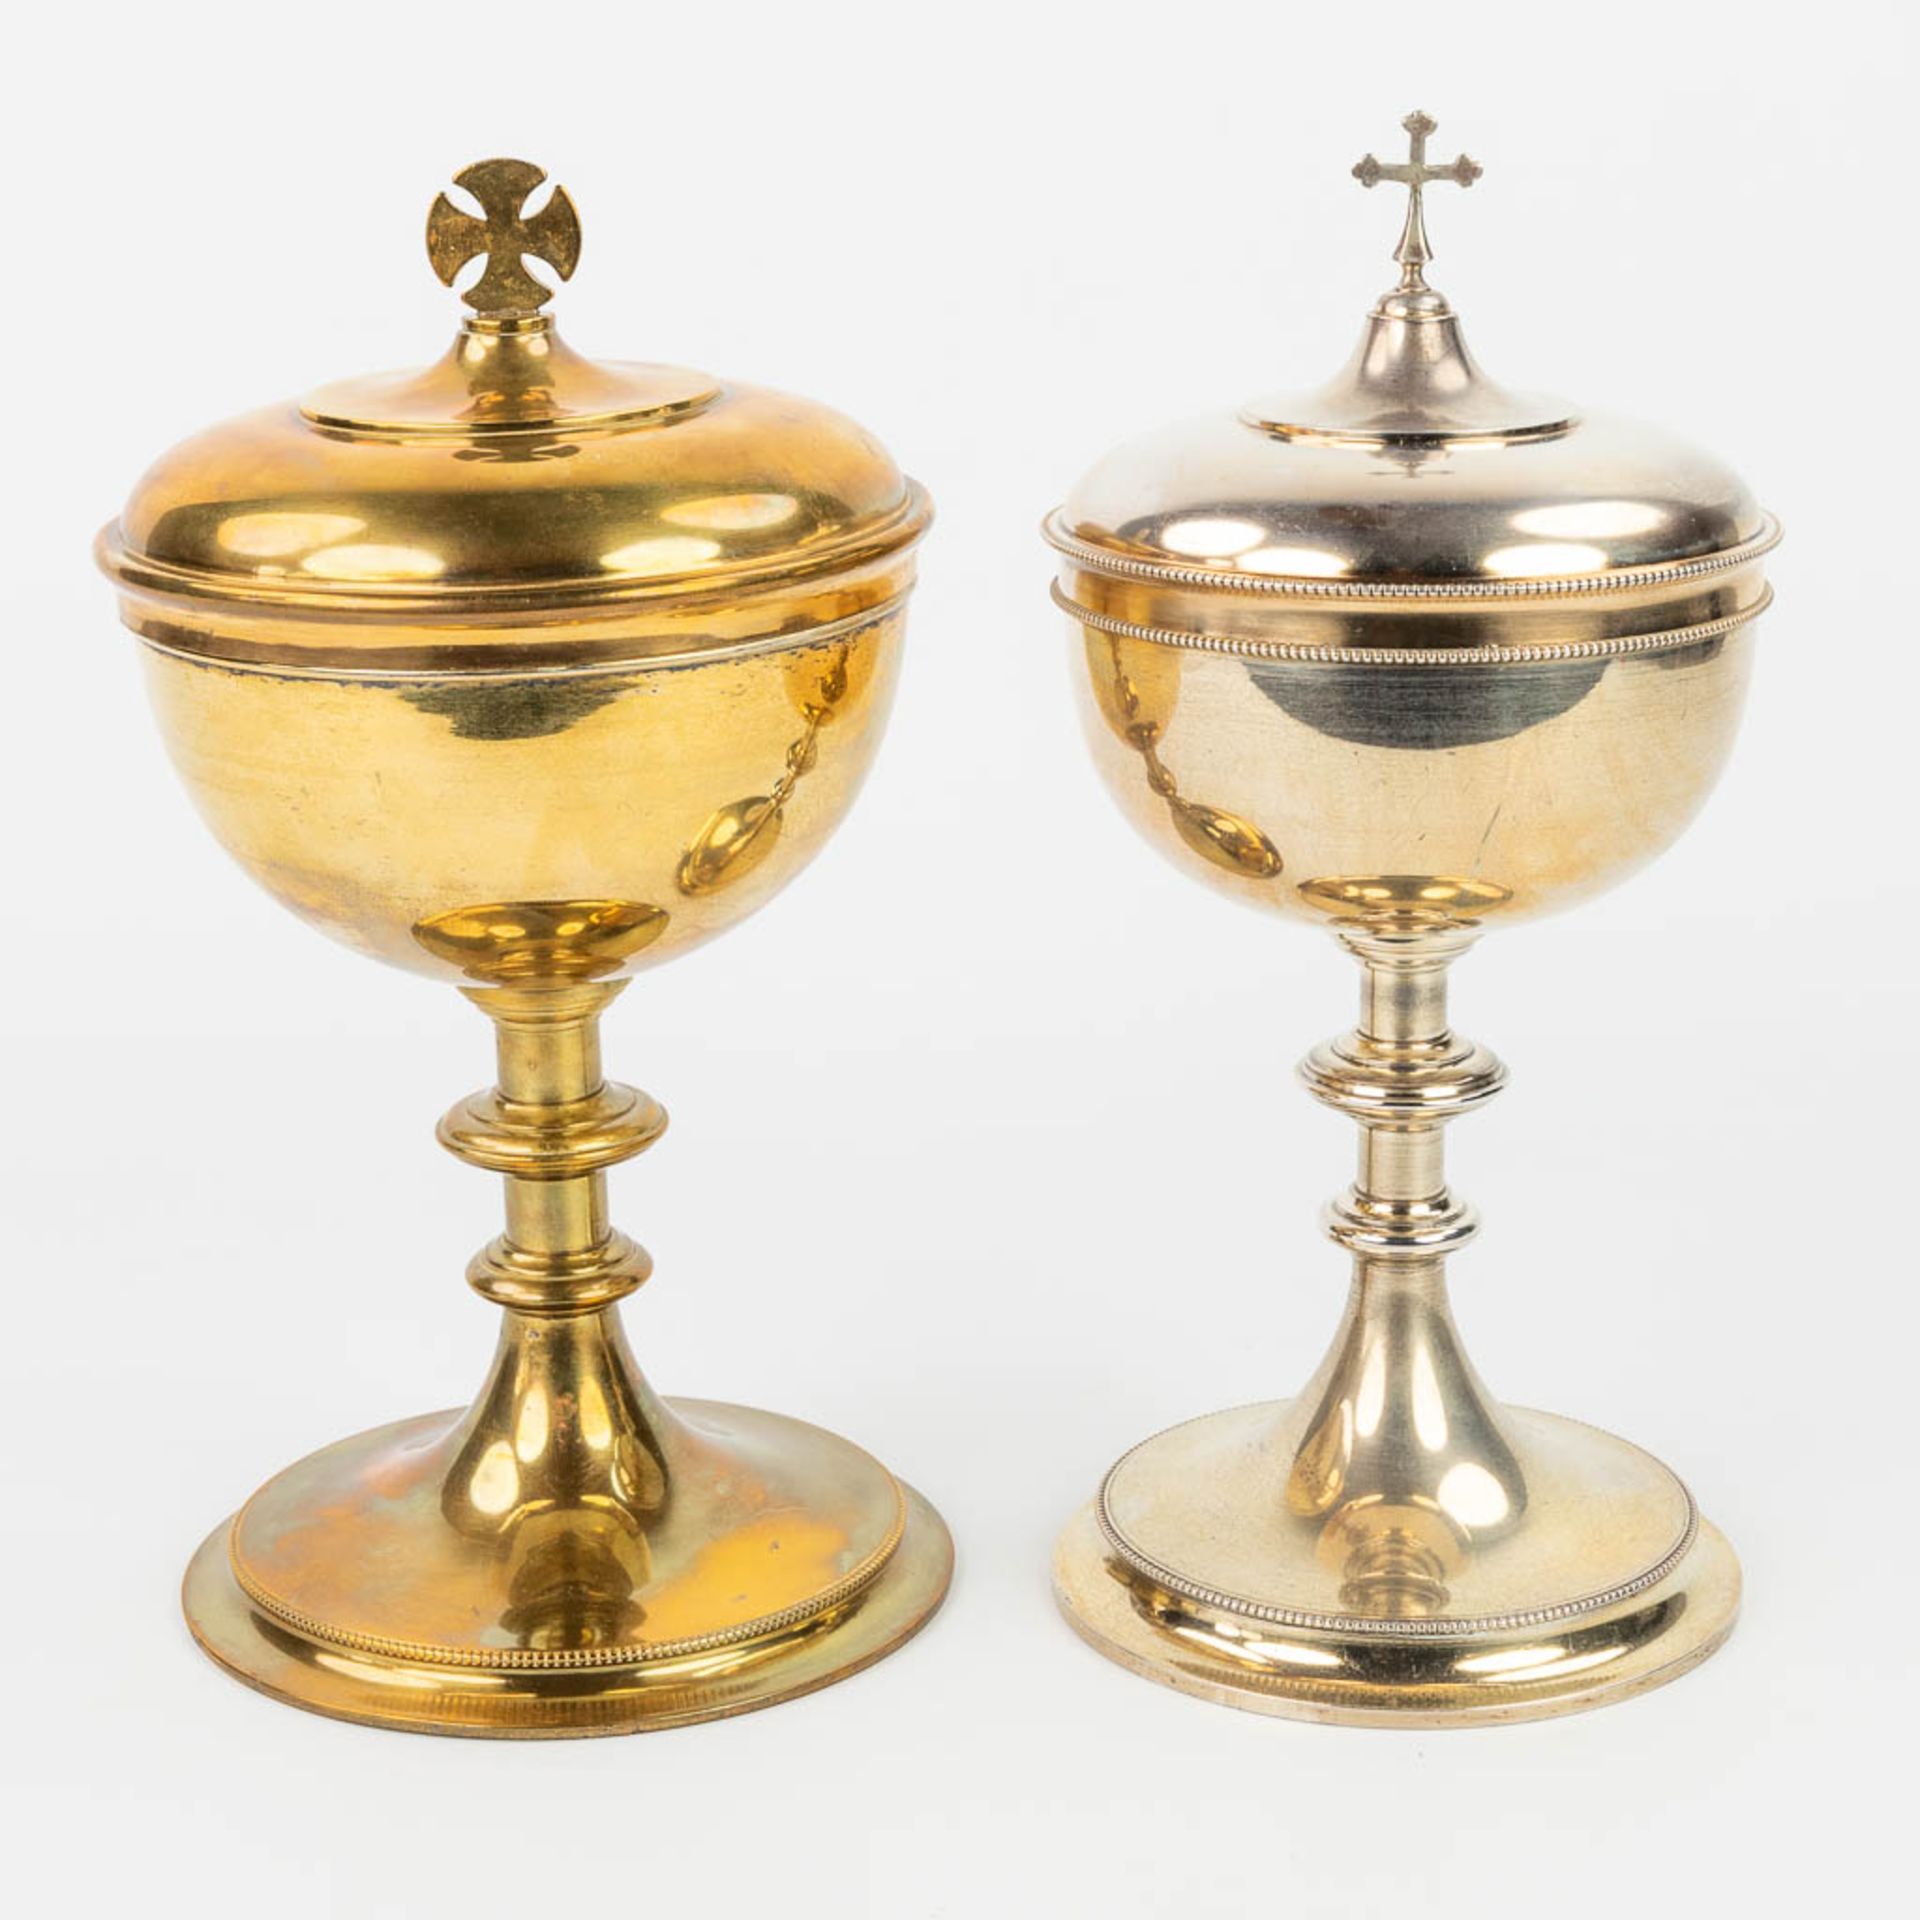 A collection of 4 large ciboria and a chalice made of silver and gold plated metal. - Image 19 of 24